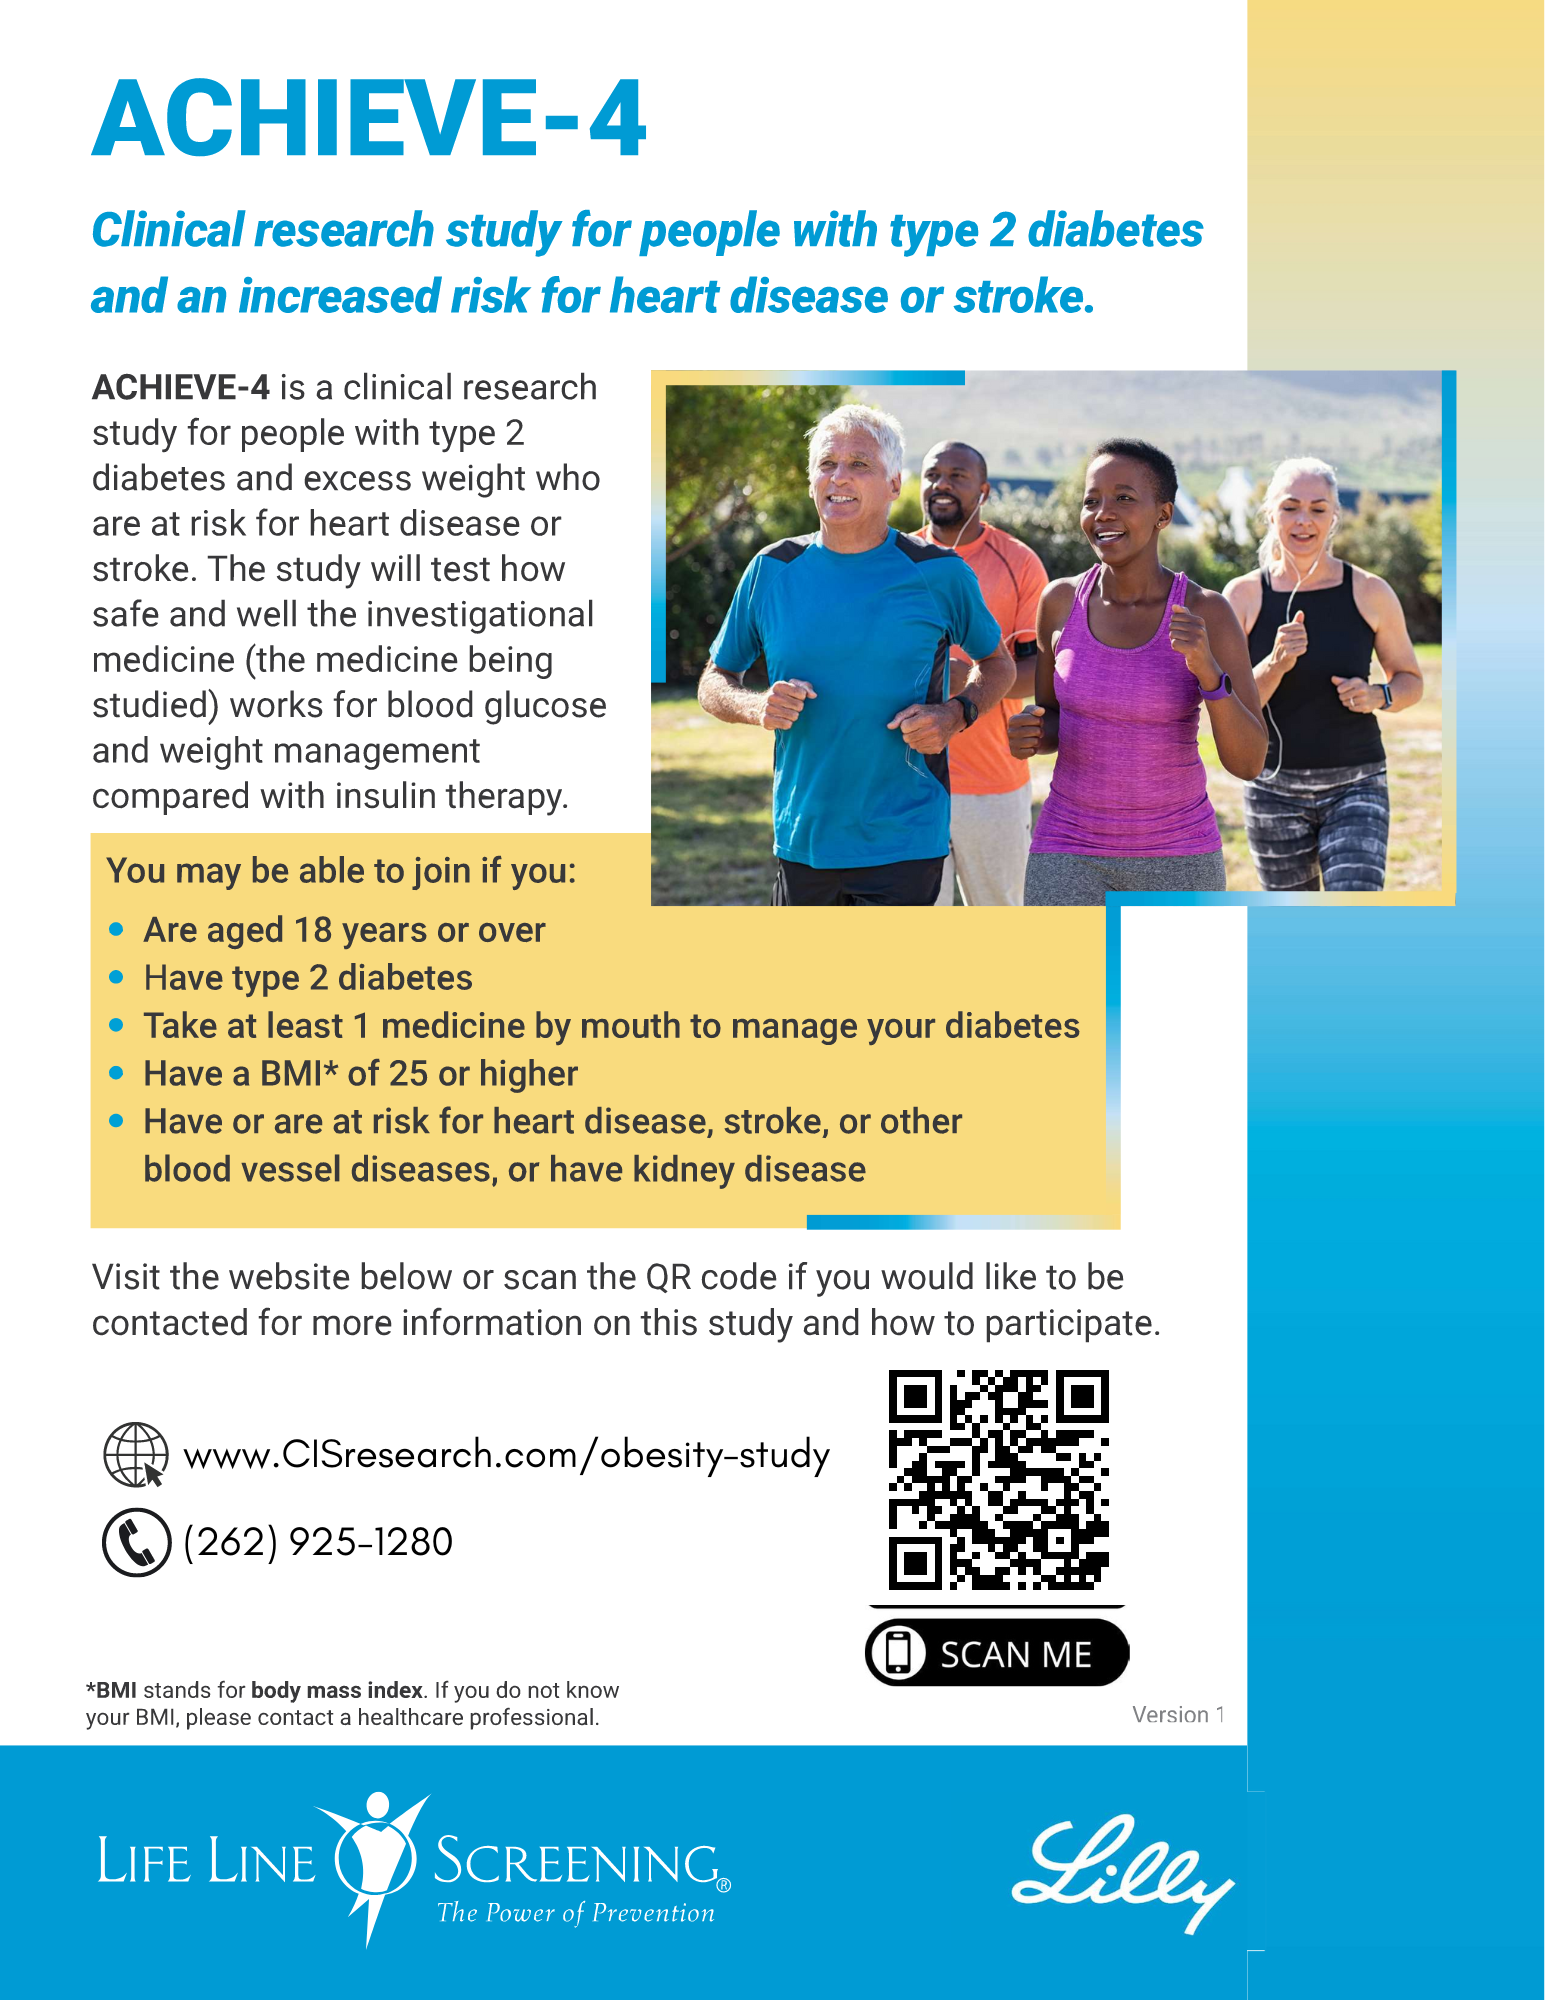 This study is for those with type 2 diabetes who are obese and at an increased risk for heart disease or stroke. 